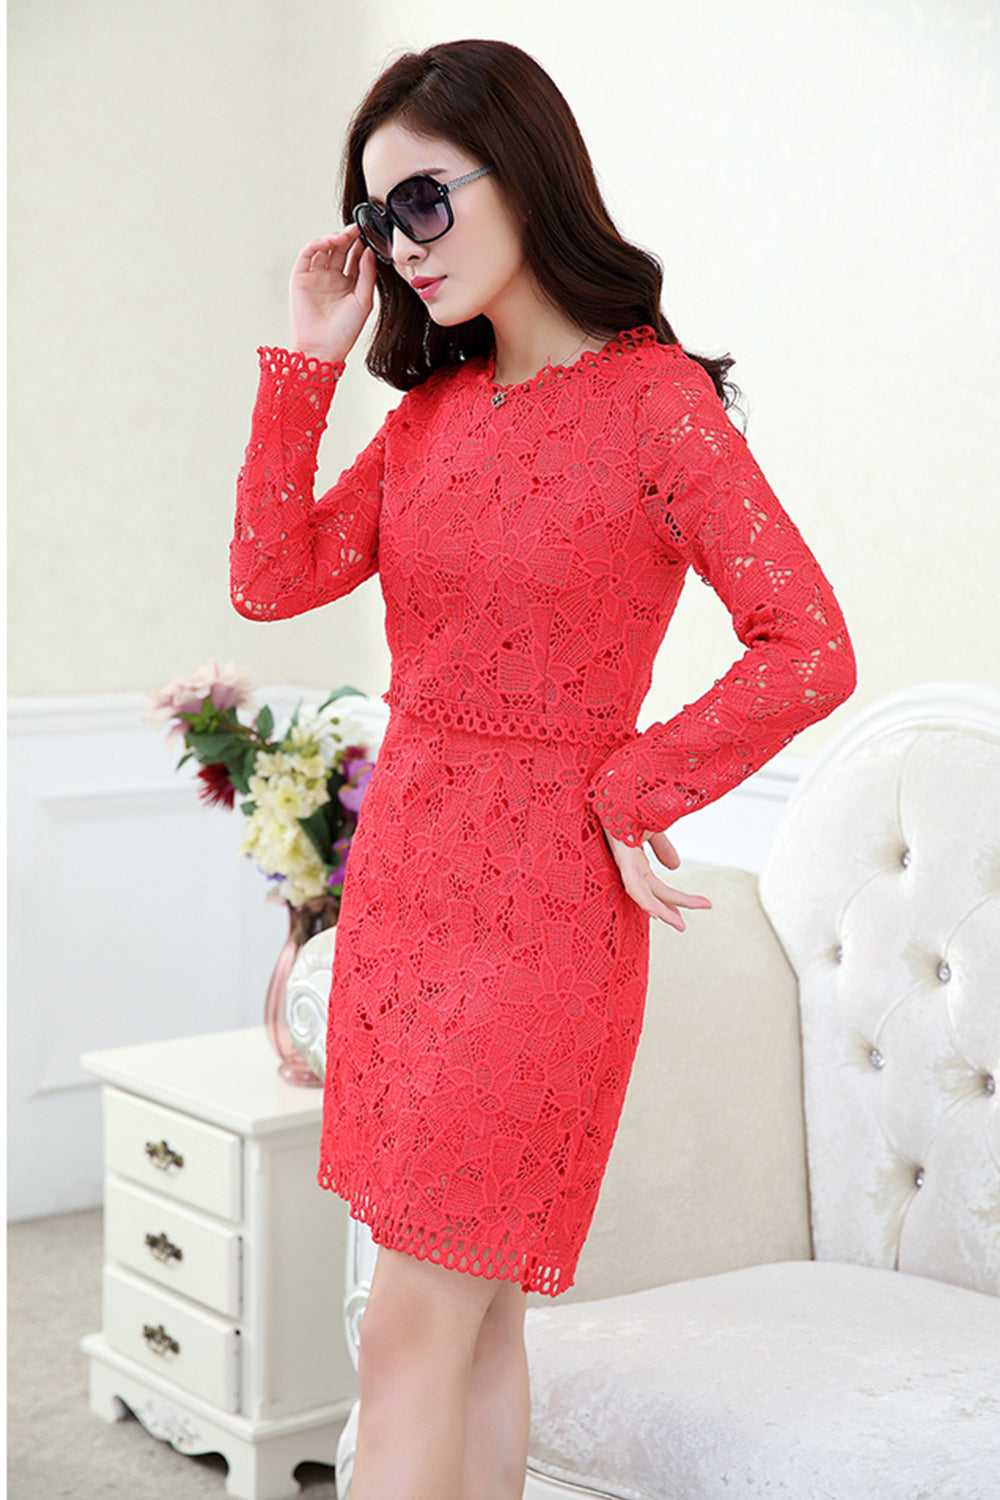 Ketty More Women Short Length Lace Decorated Shift Dress-KMWD408